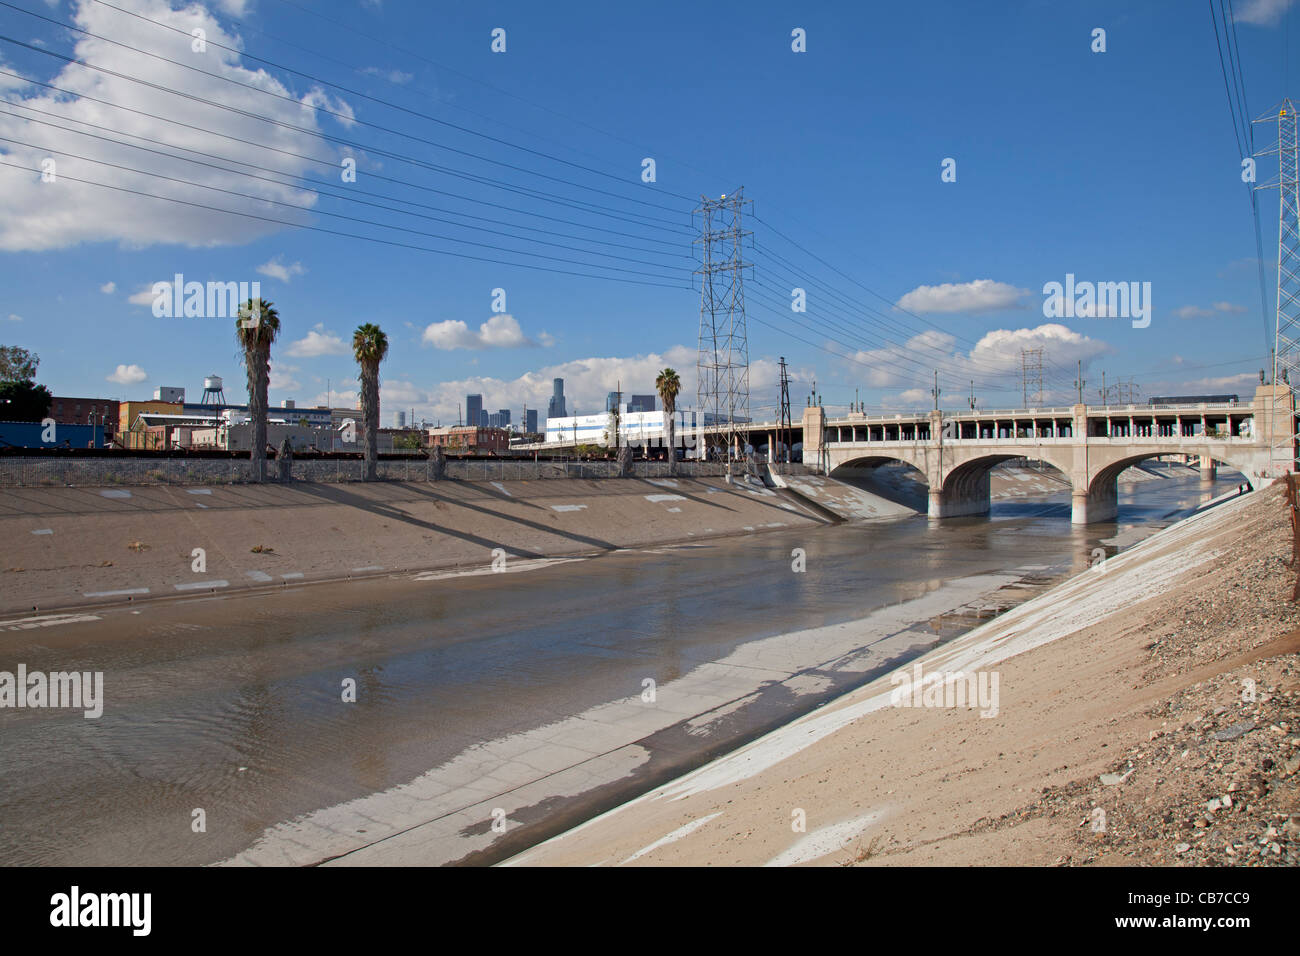 7th Street Bridge over the Los Angeles River, Downtown Los Angeles, California, USA Stock Photo